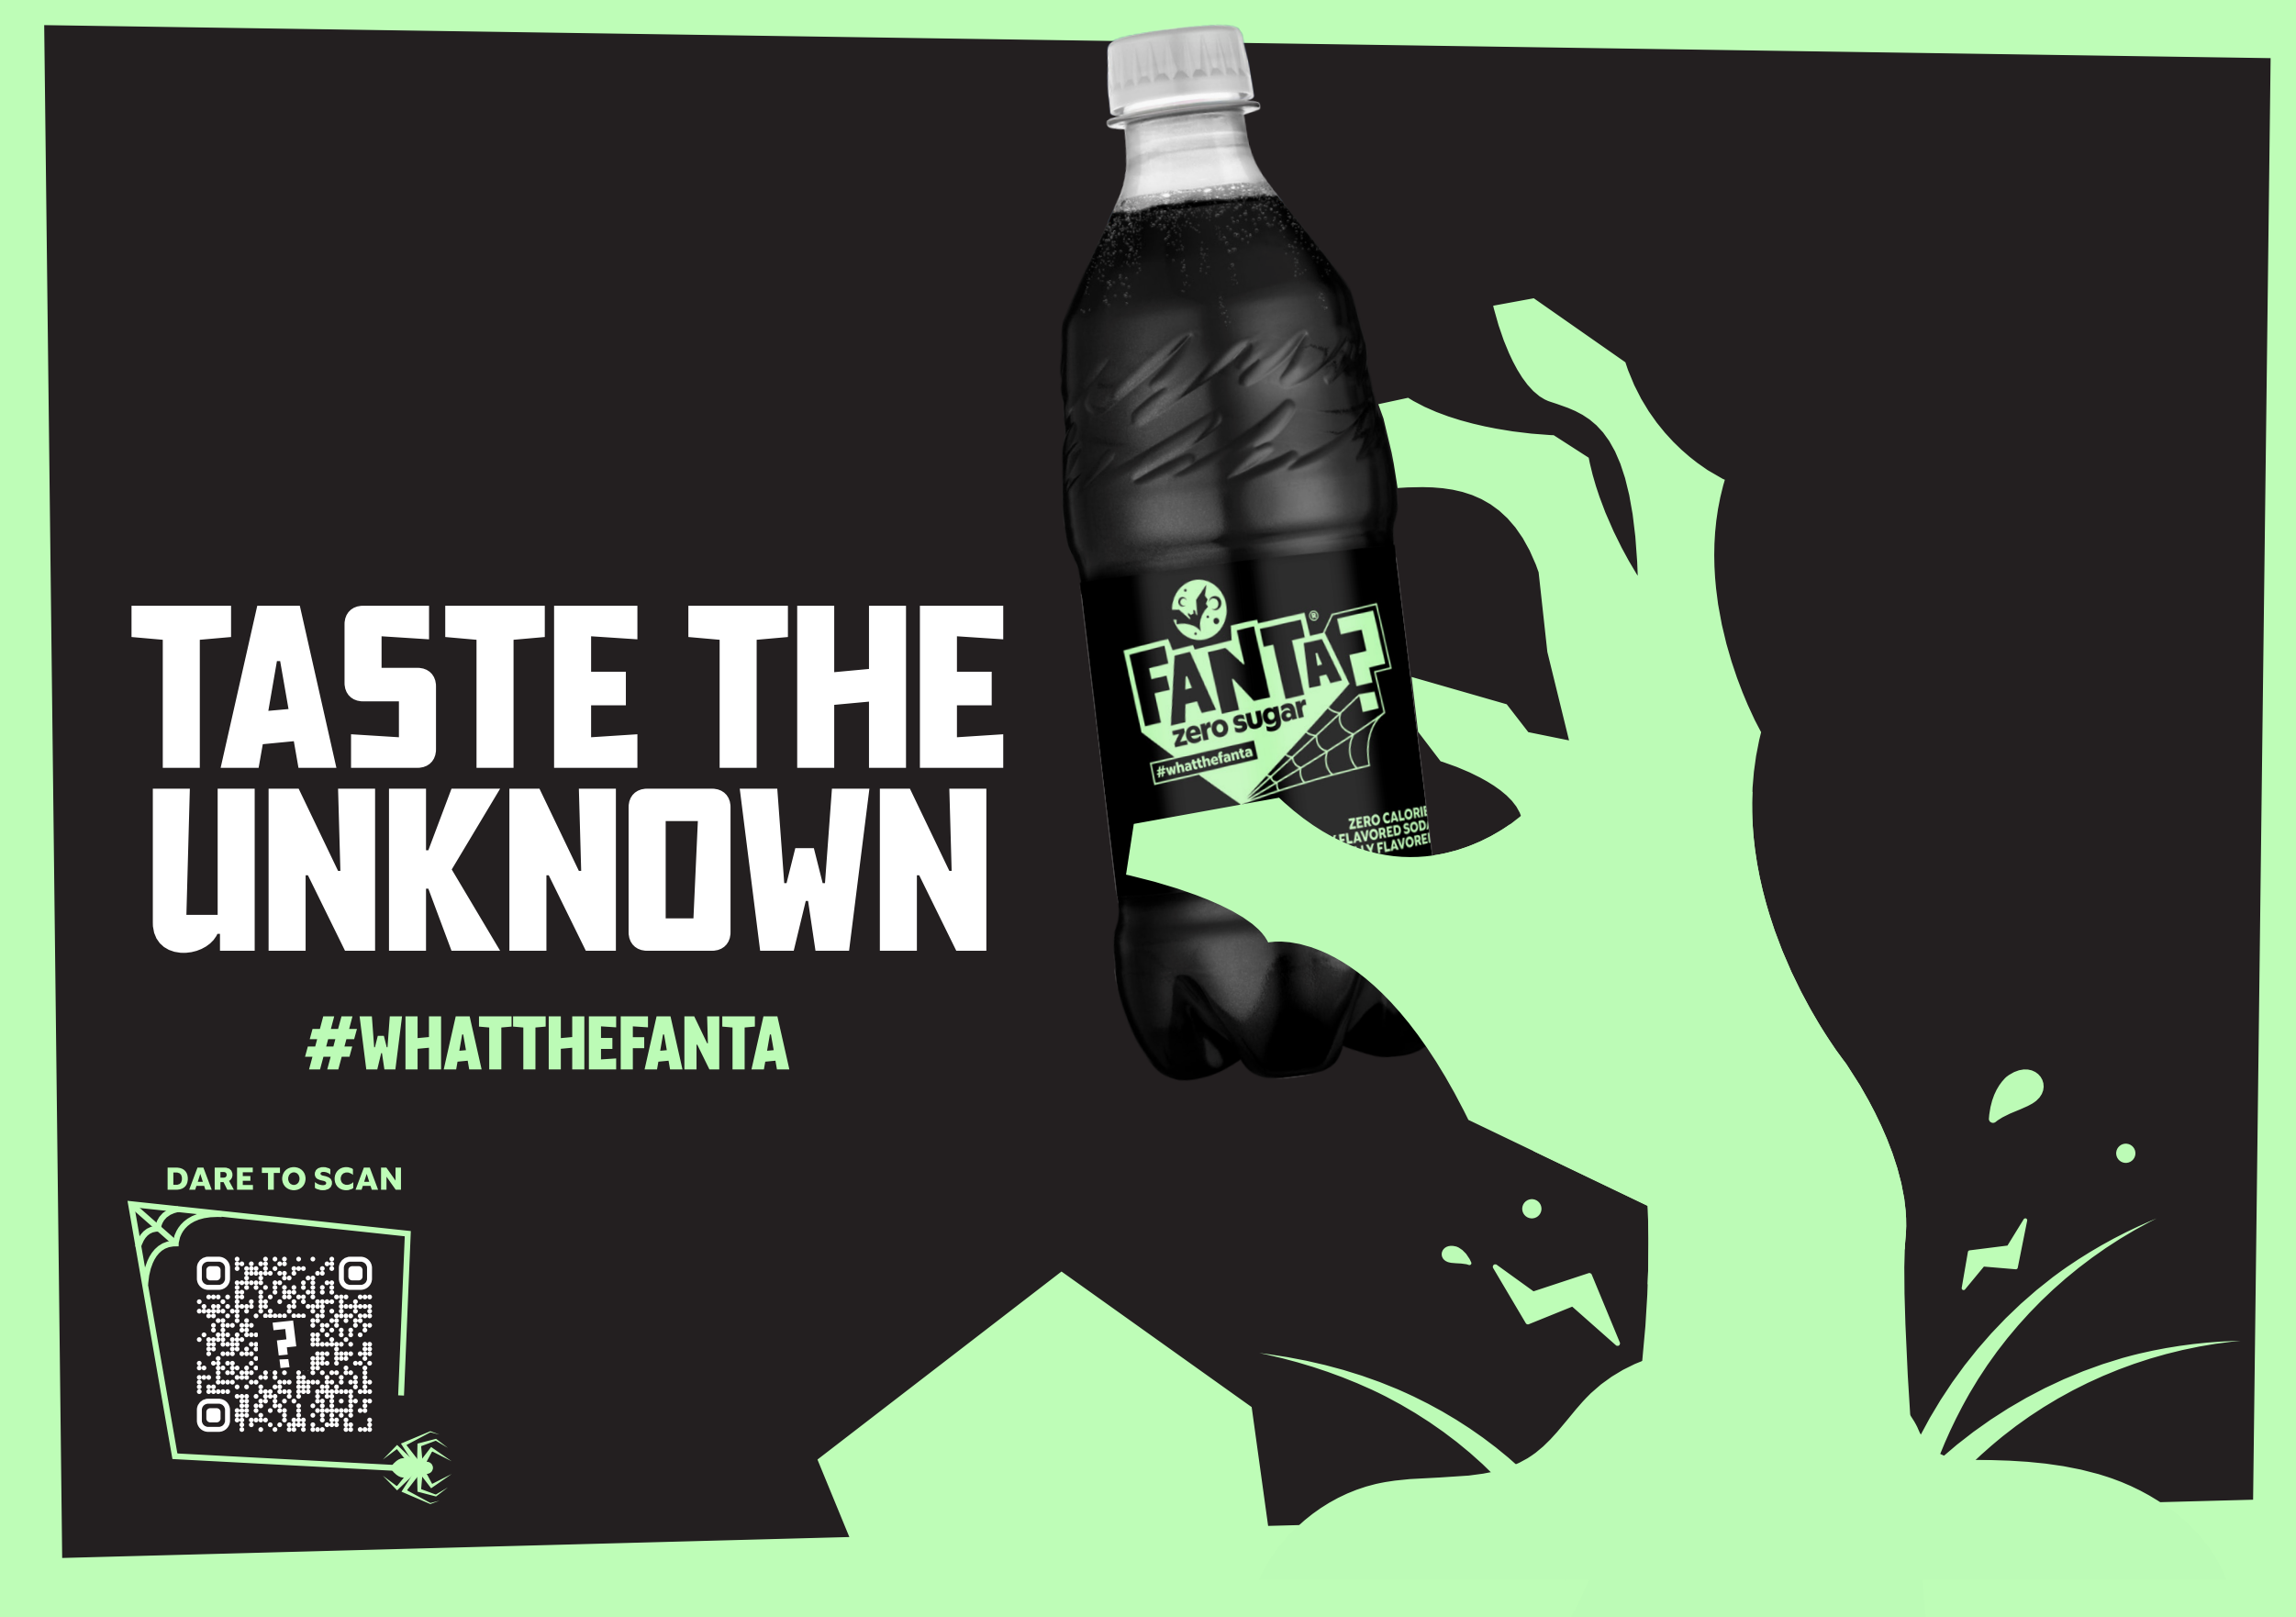 What The Fanta Taste The Unknown